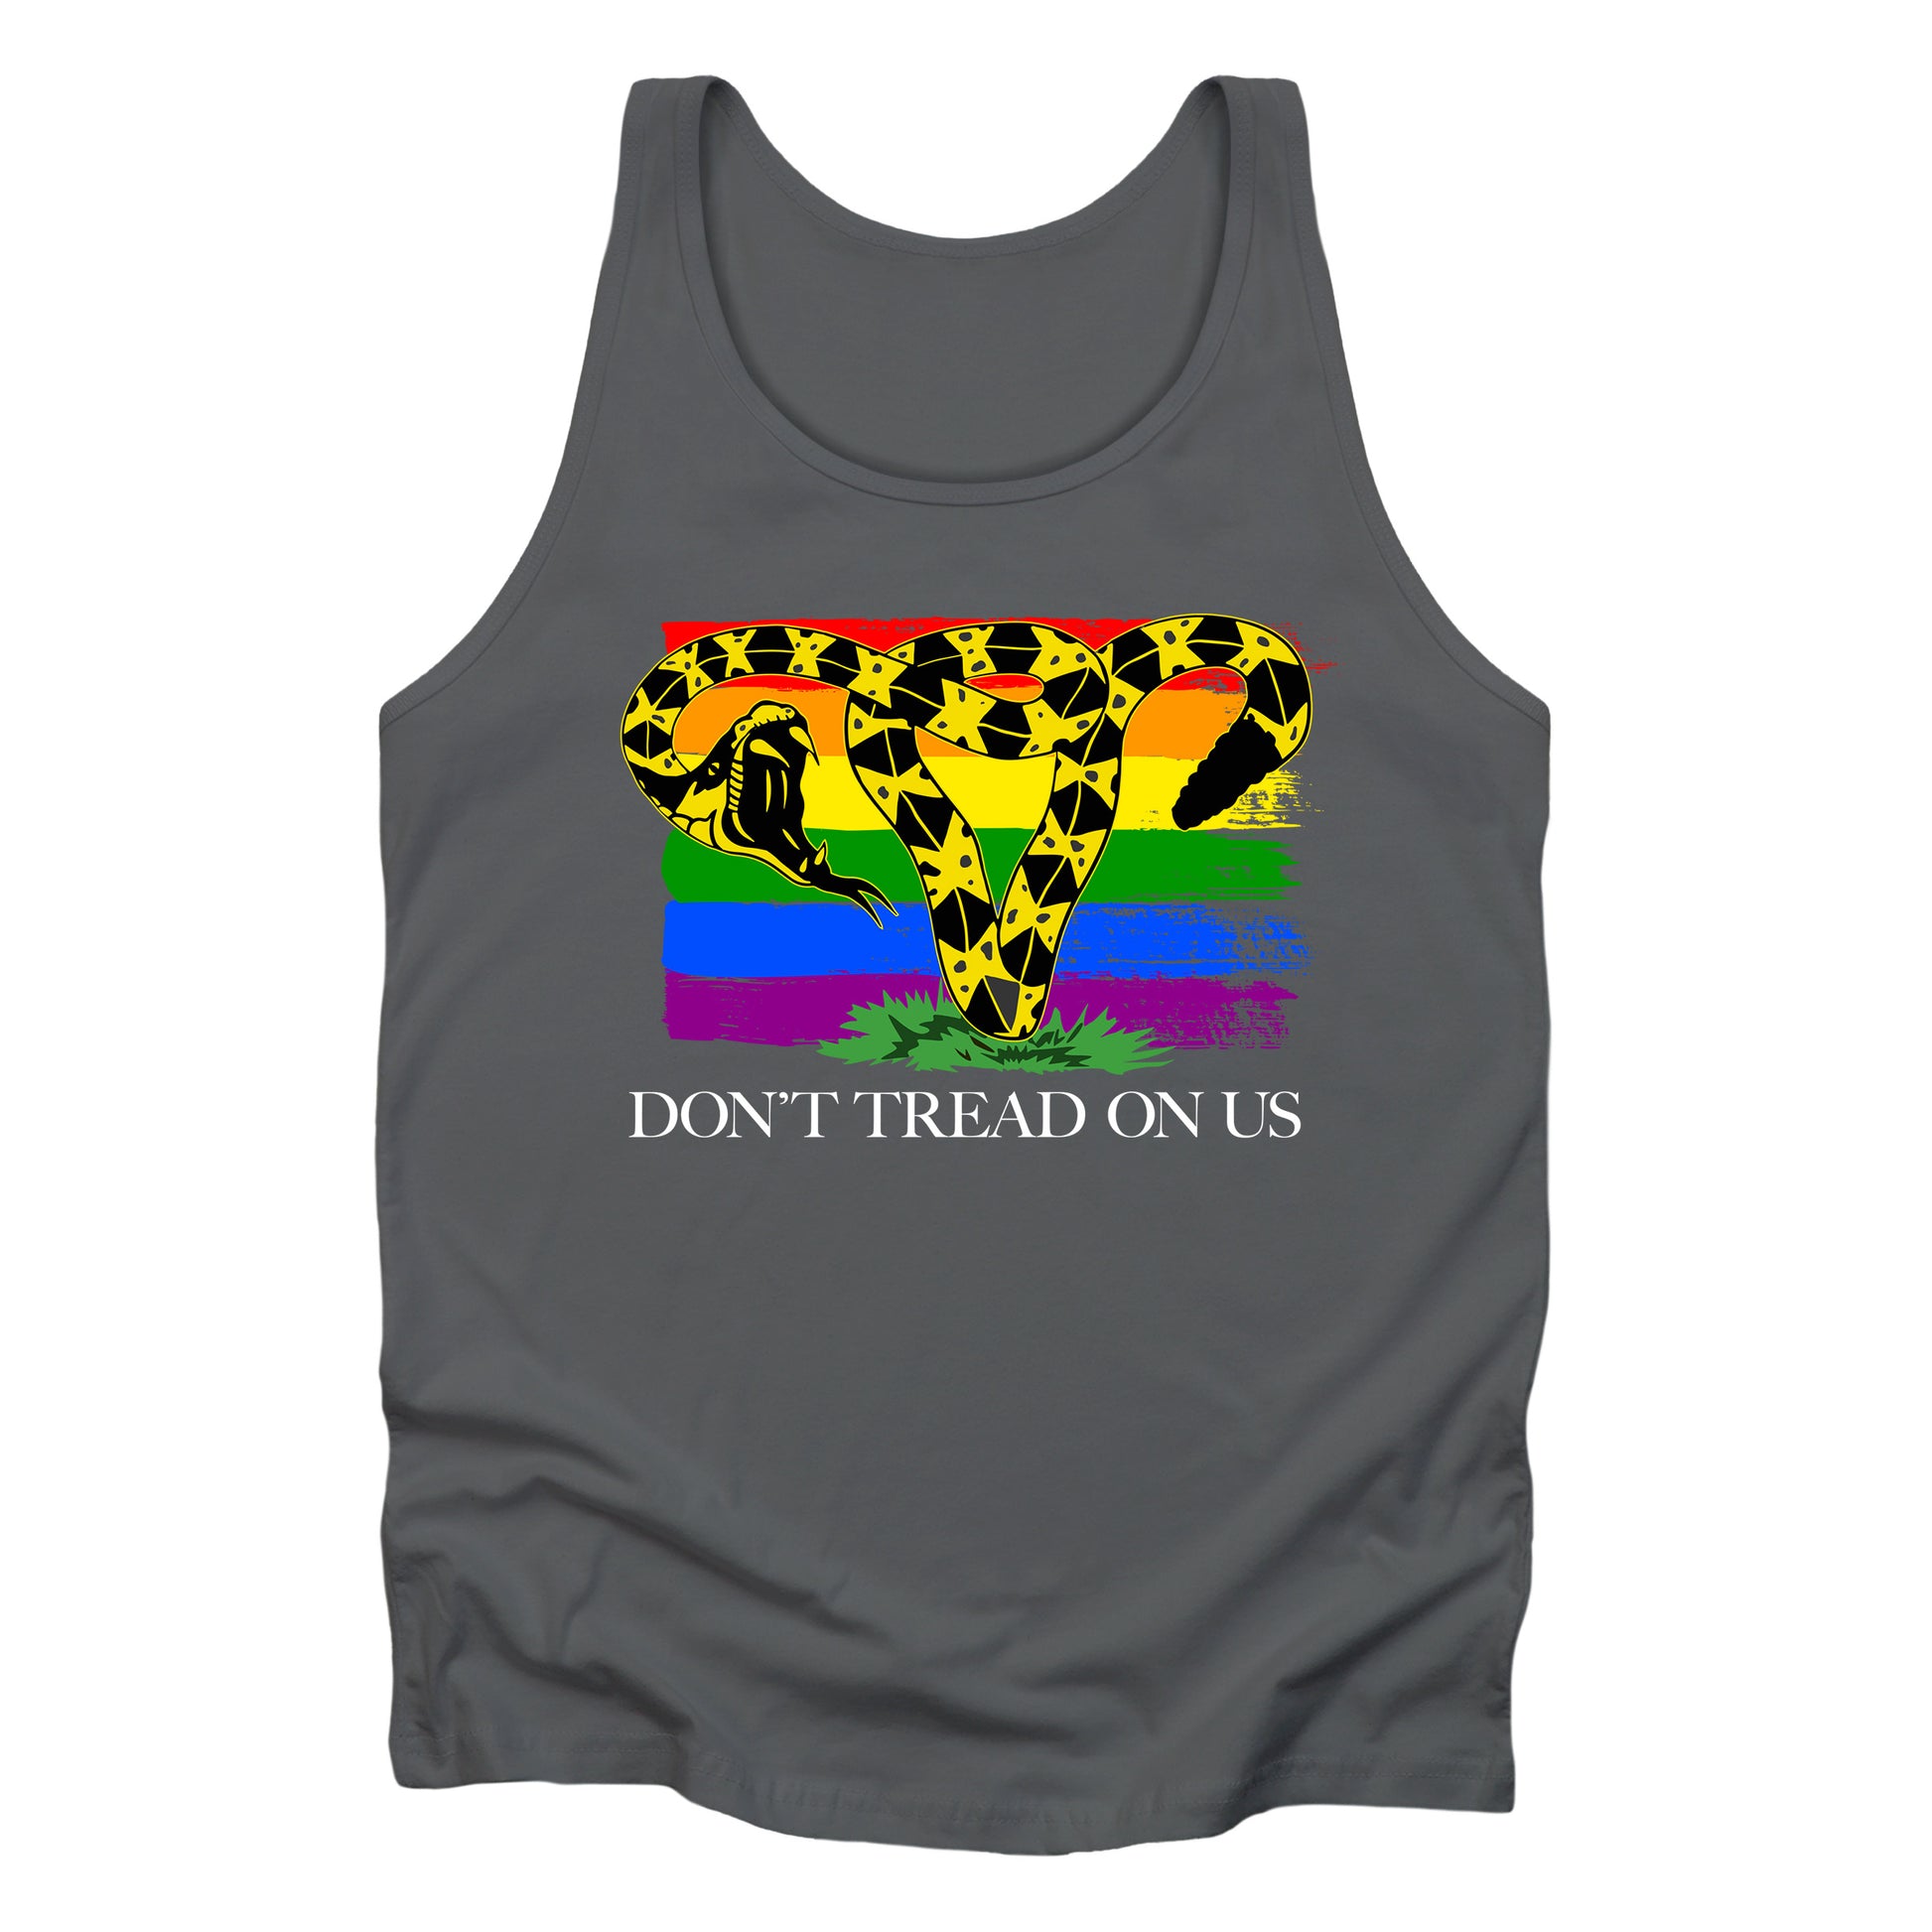 Asphalt color unisex tank top with the “Don’t tread on me” snake redrawn into the shape of a uterus. A rainbow flag is painted in the background. Underneath the image reads “Don’t tread on us” in all caps.